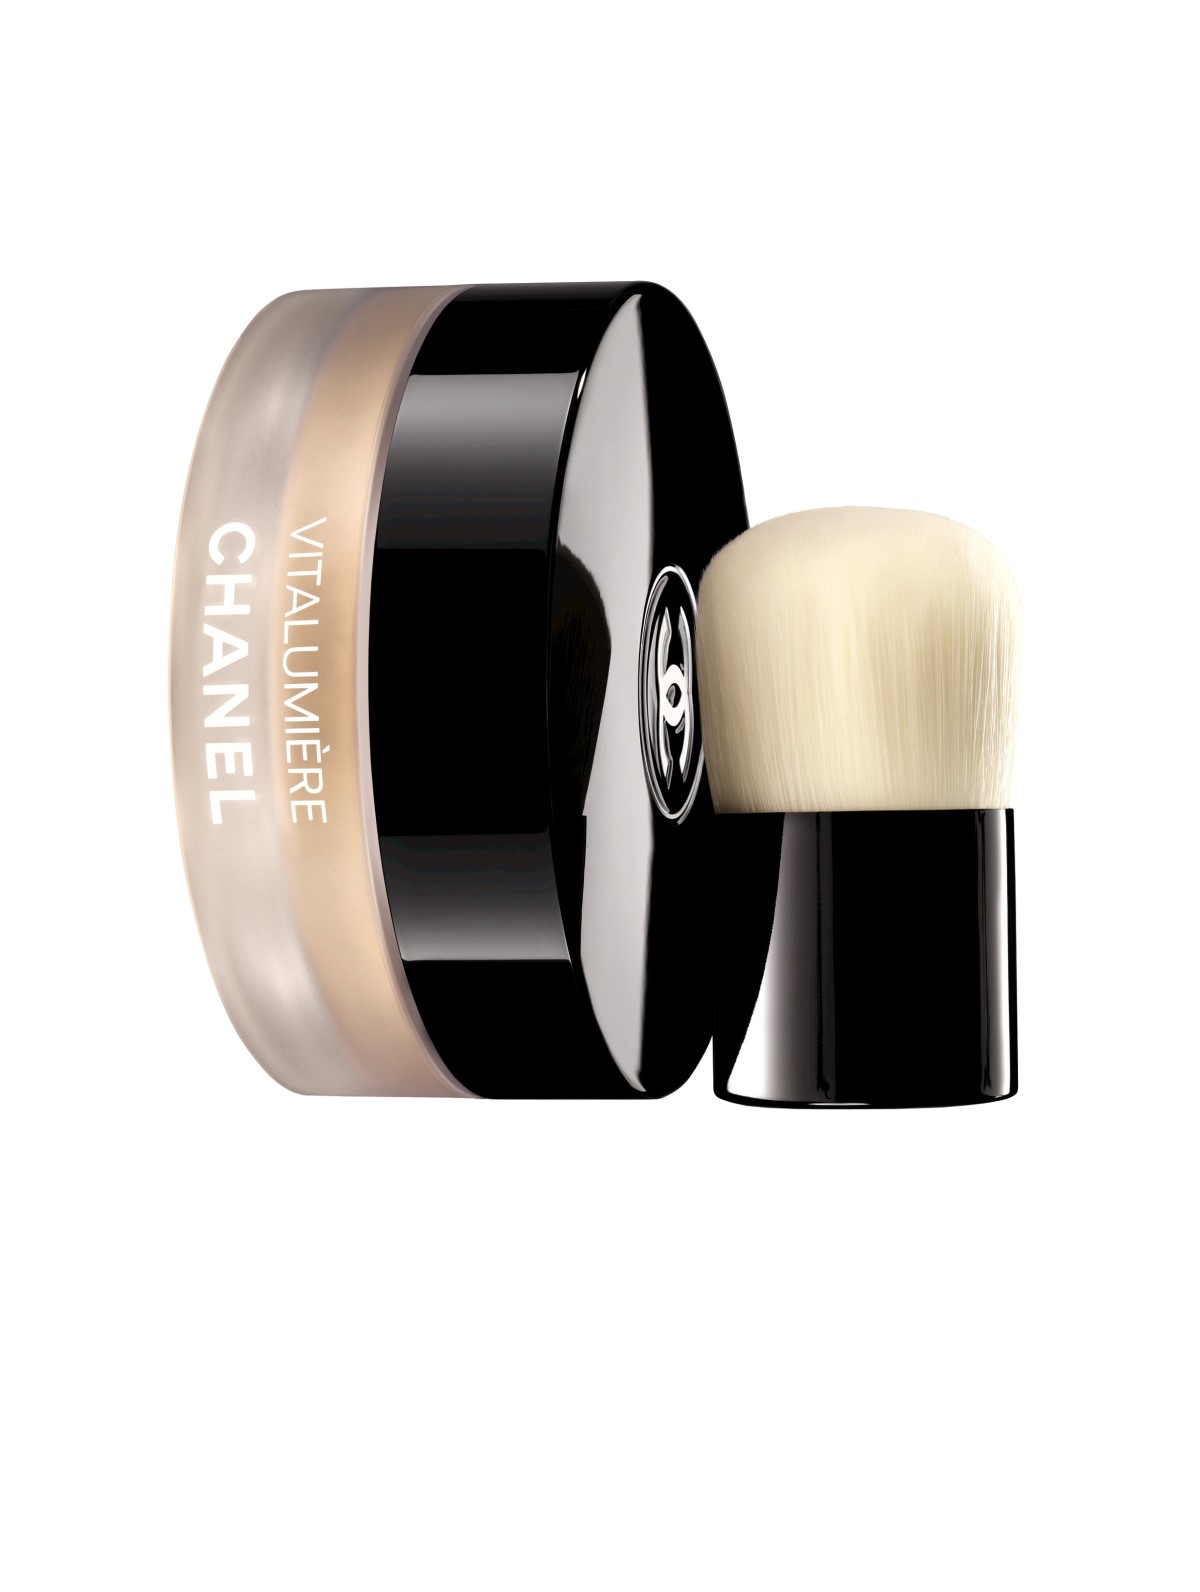 Chanel Vitalumiere Loose Powder Foundation for Fall 2014 - Beauty